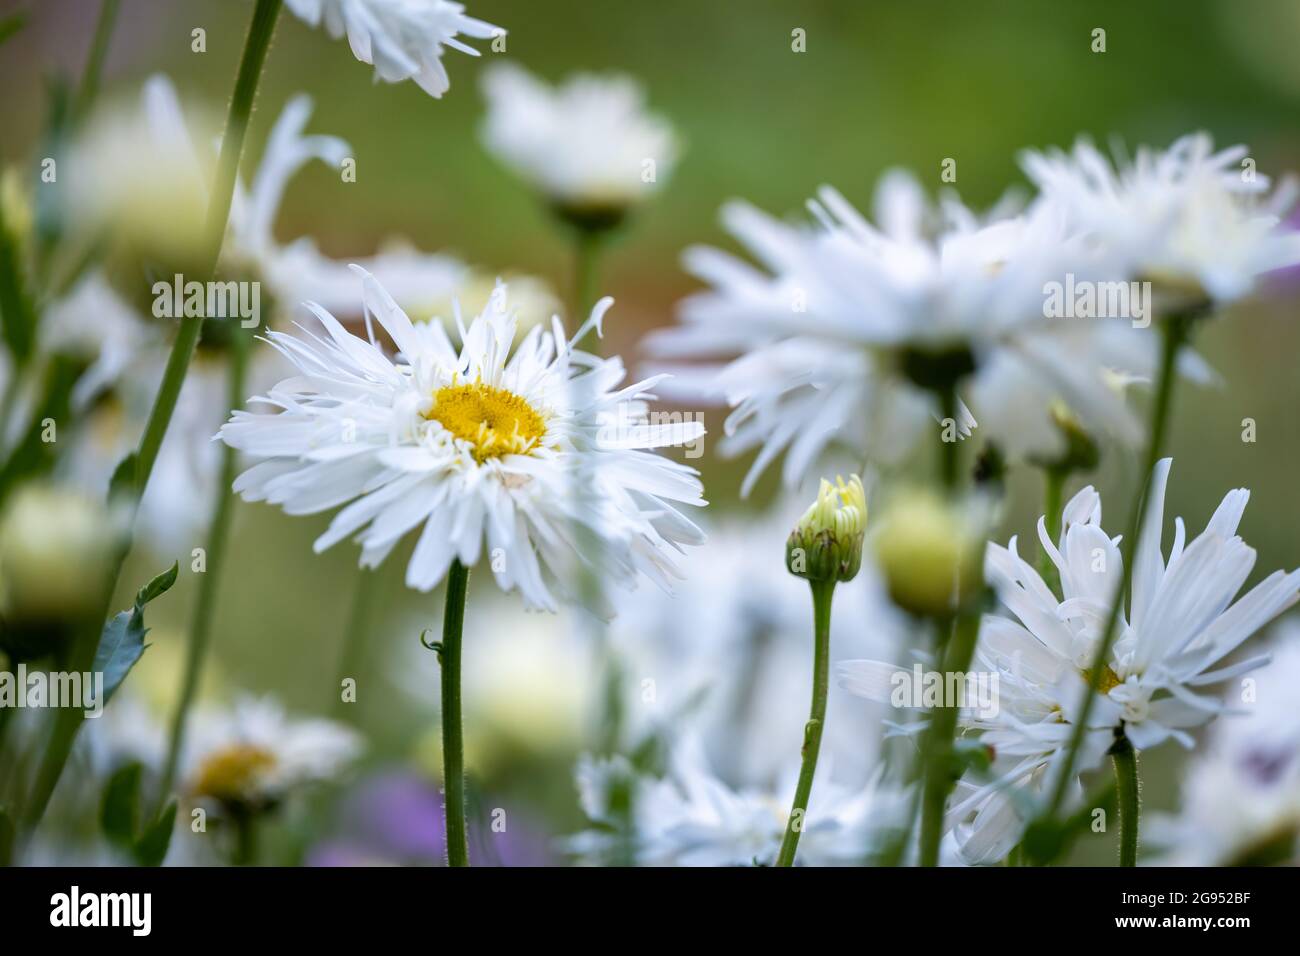 British cottage garden flowers in full bloom during midsummer, yellow and white daisy in bright sunshine Stock Photo